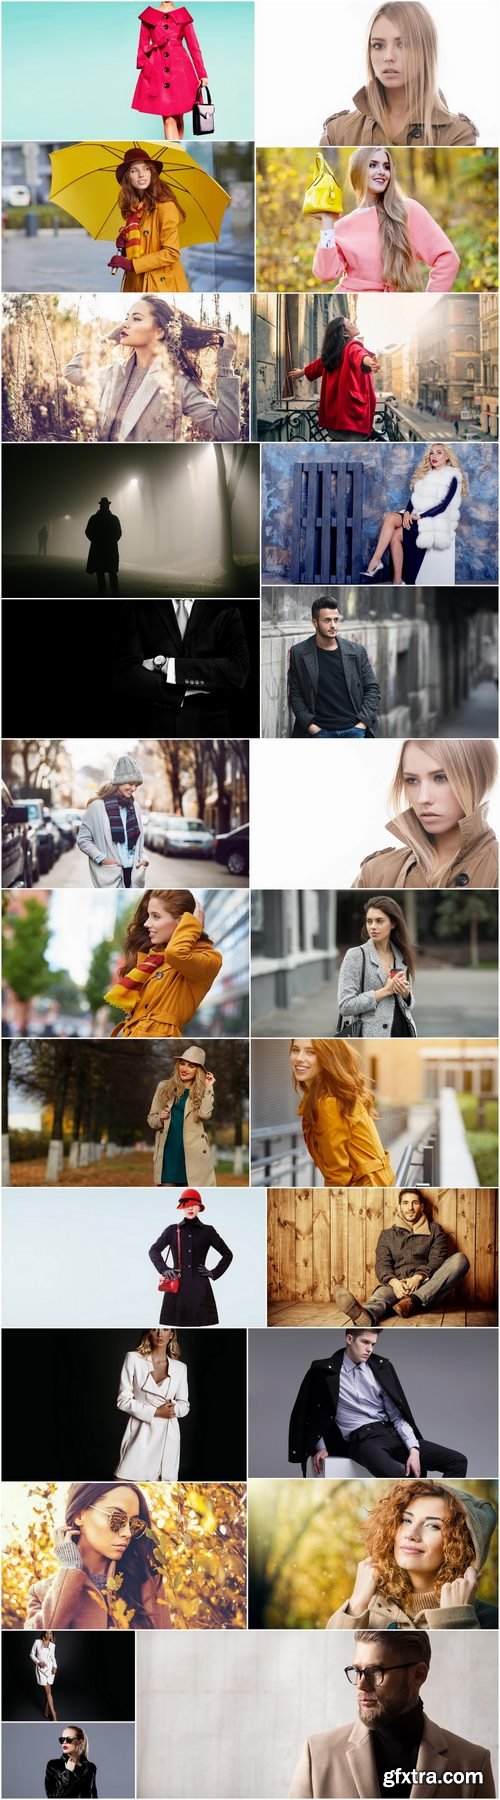 People in warm clothes coat autumn woman man 25 HQ Jpeg